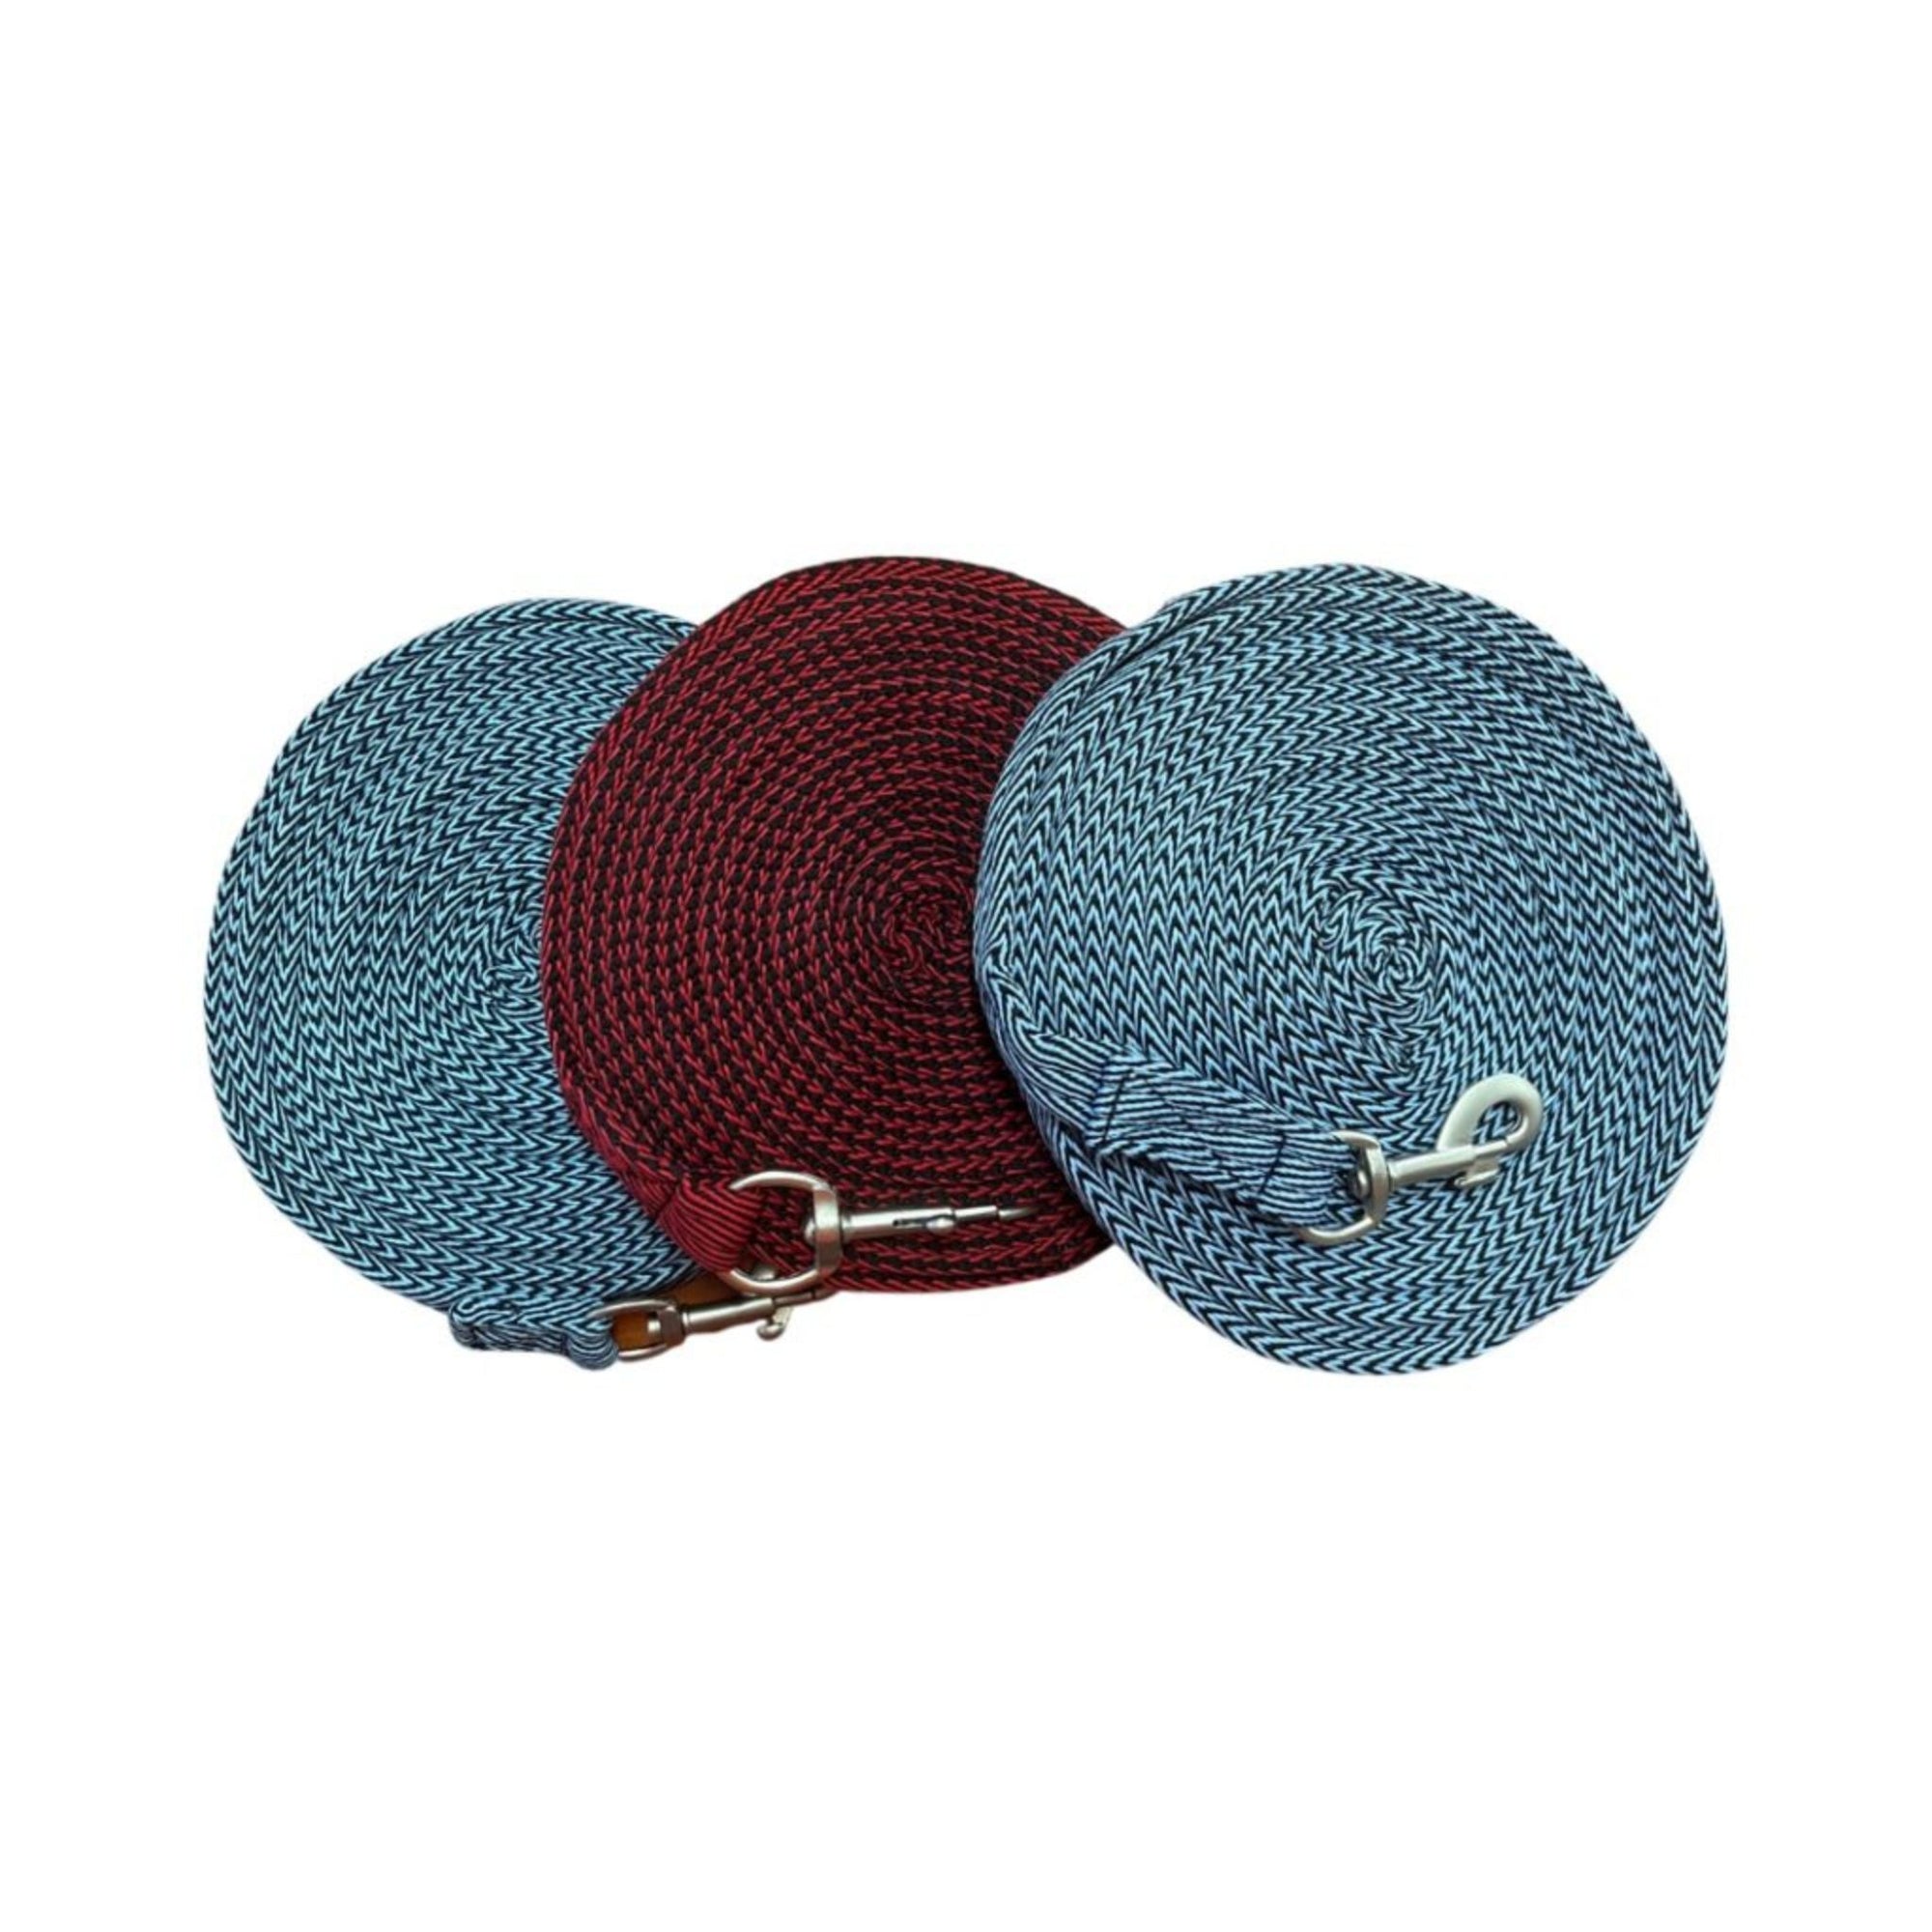 Aqua and navy lunge line with silver clip and loop at end.